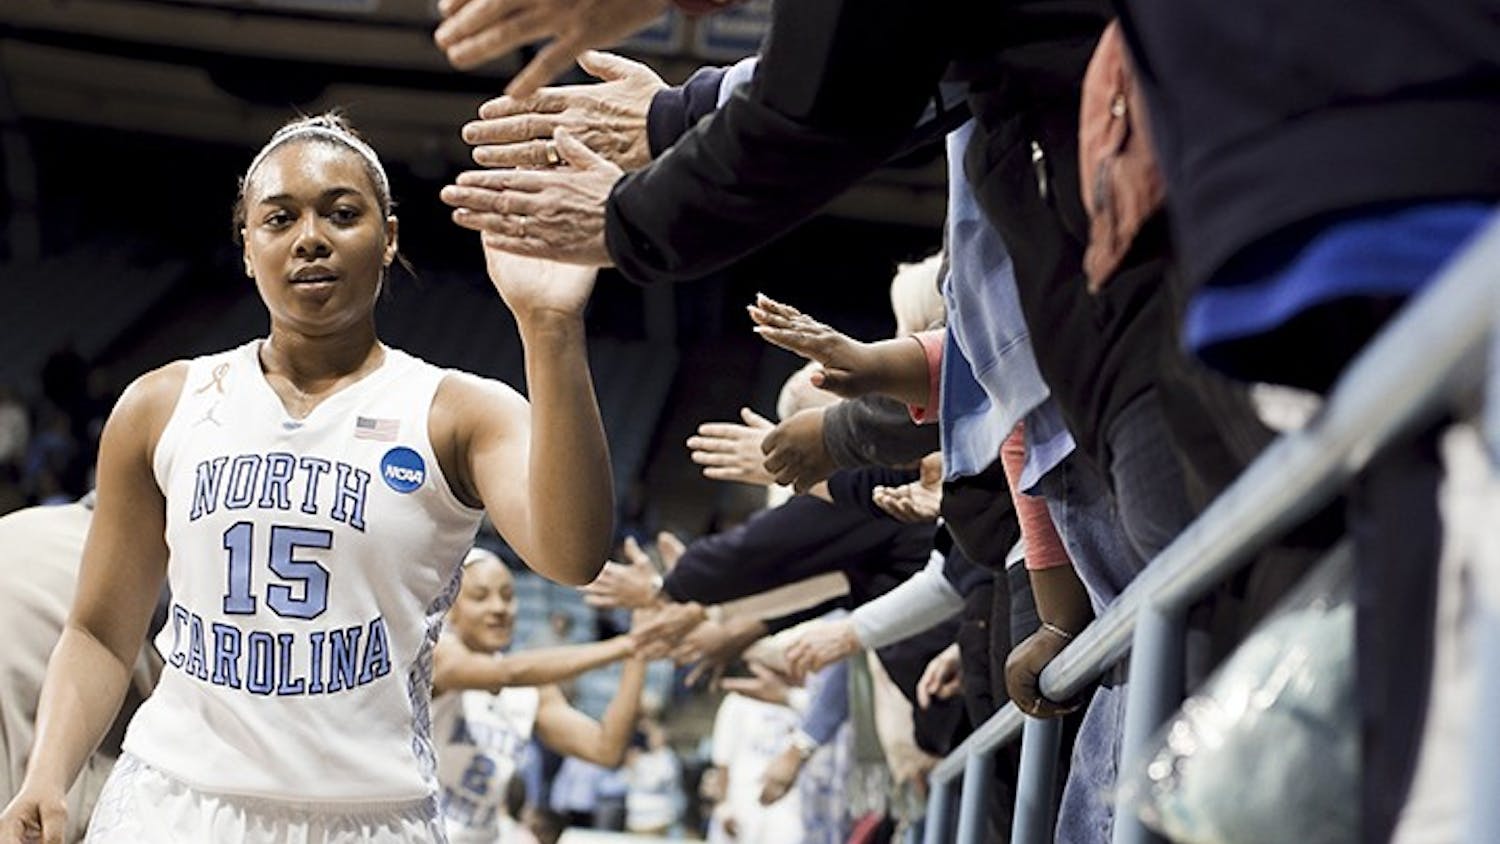 North Carolina&apos;s Allisha Gray (15) celebrates the Tar Heels&apos; 62-53 victory over the Michigan State Spartans during the second round of the NCAA Tournament at Carmichael Arena in Chapel Hill, N.C., on Tuesday, March 25, 2014. (Robert Willett/Raleigh News &amp; Observer/MCT)